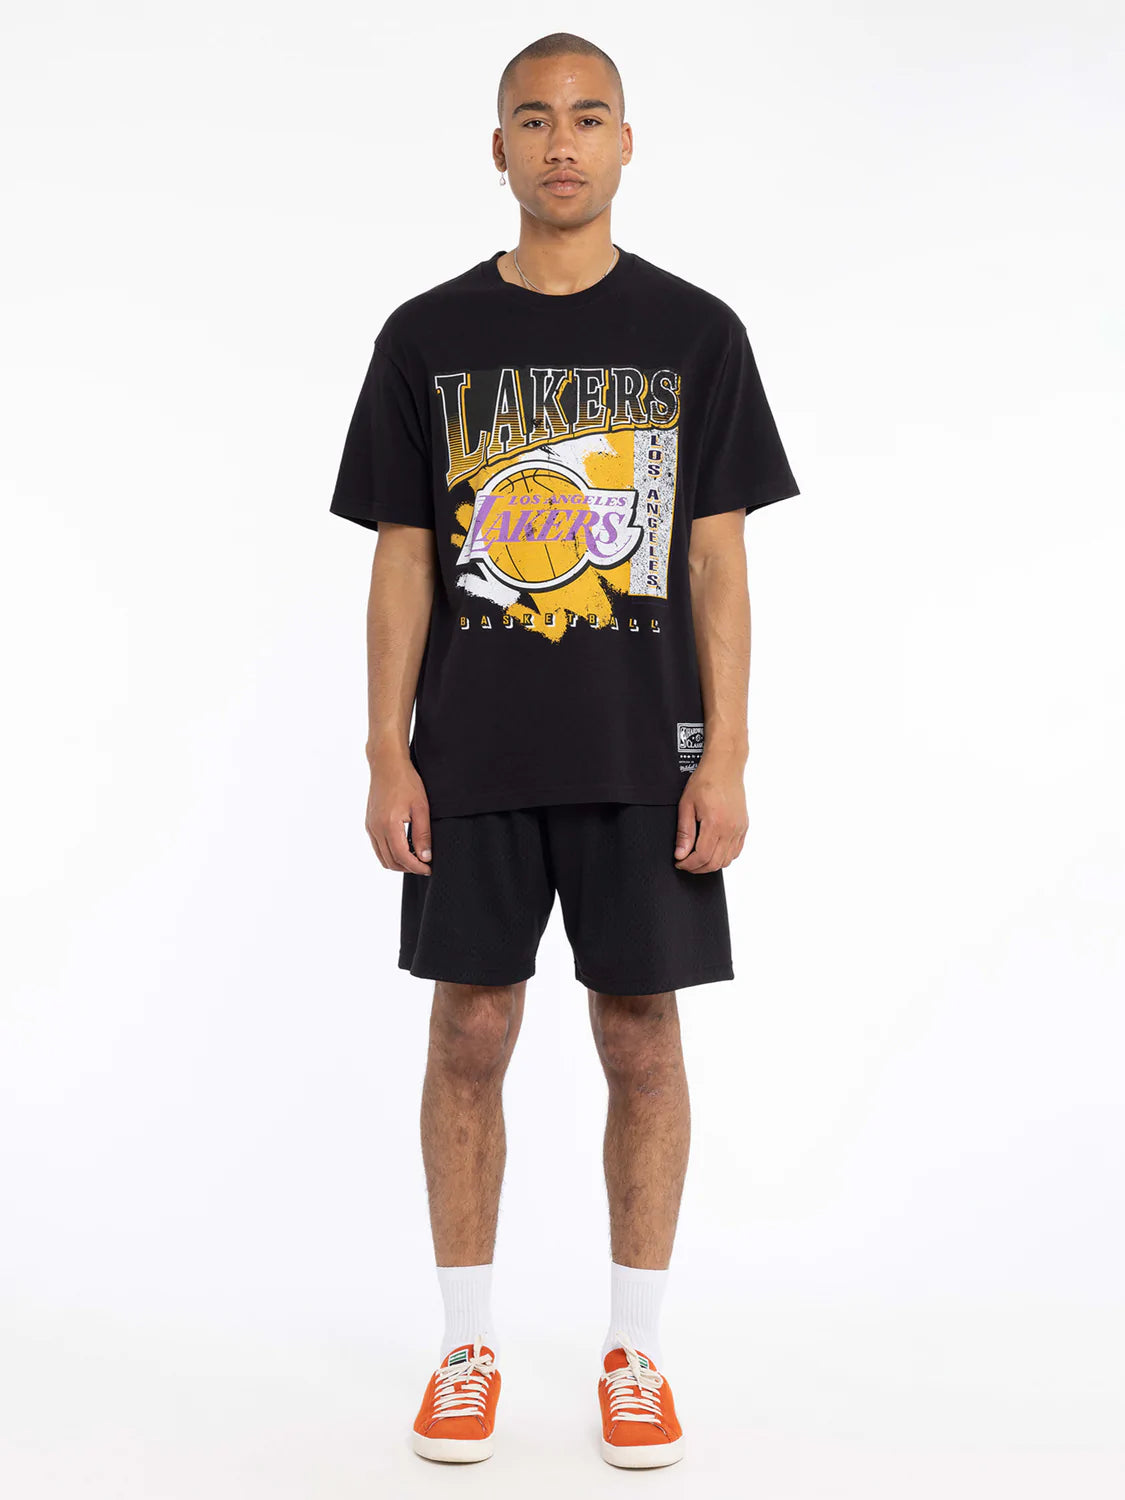 ADIDAS L.A. Lakers Basketball Cotton T-Shirt Size S